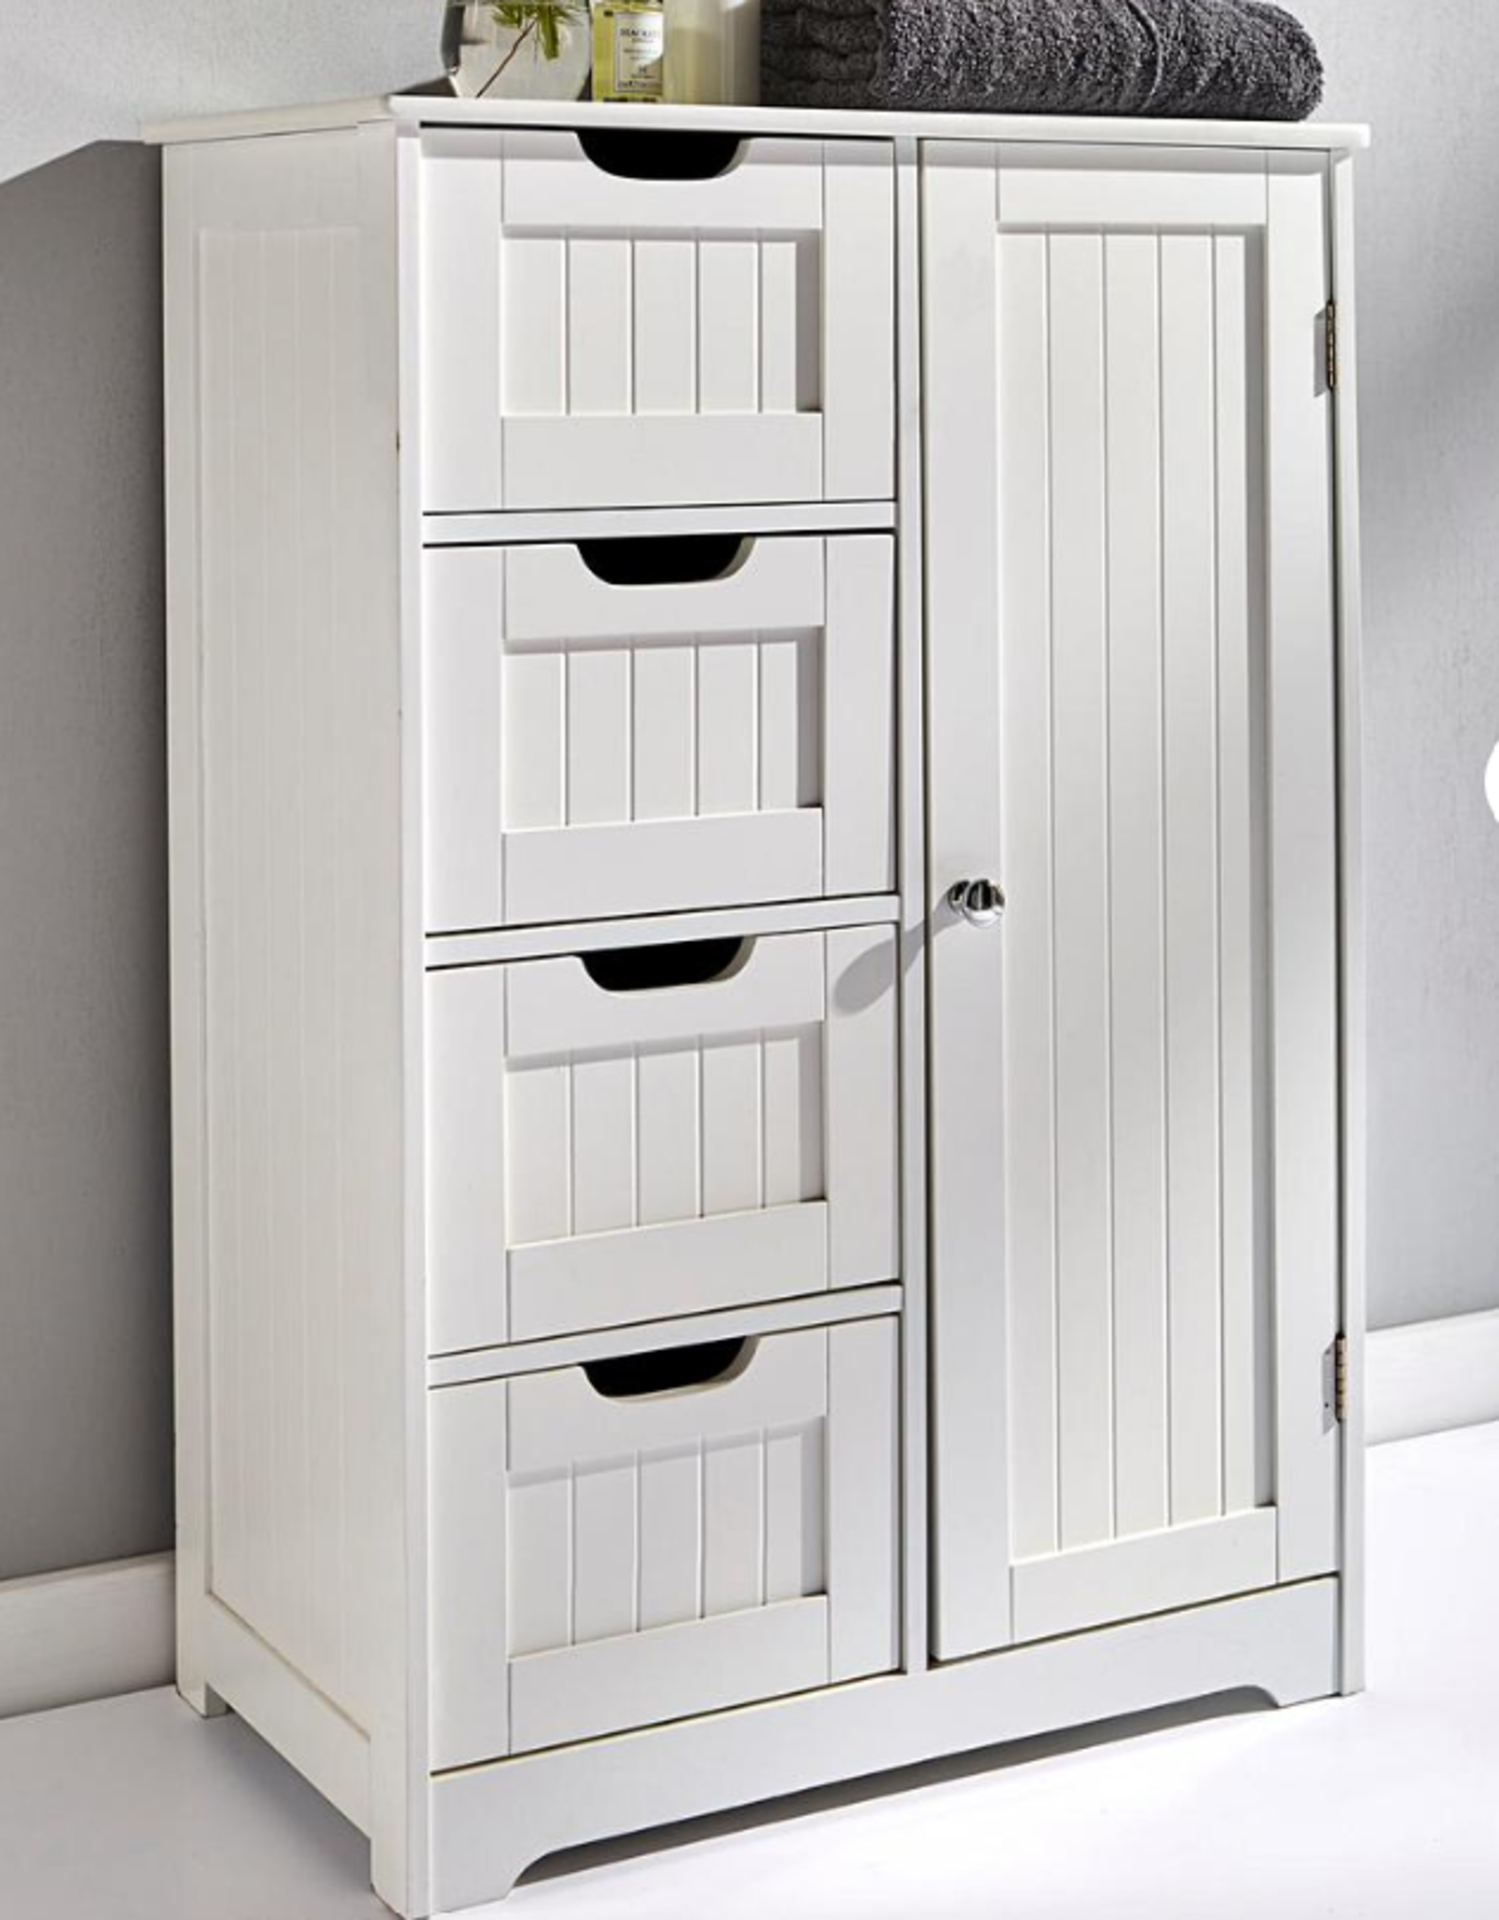 New England Storage Cabinet. - ER27. Great value, easy to assemble shaker-style bathroom